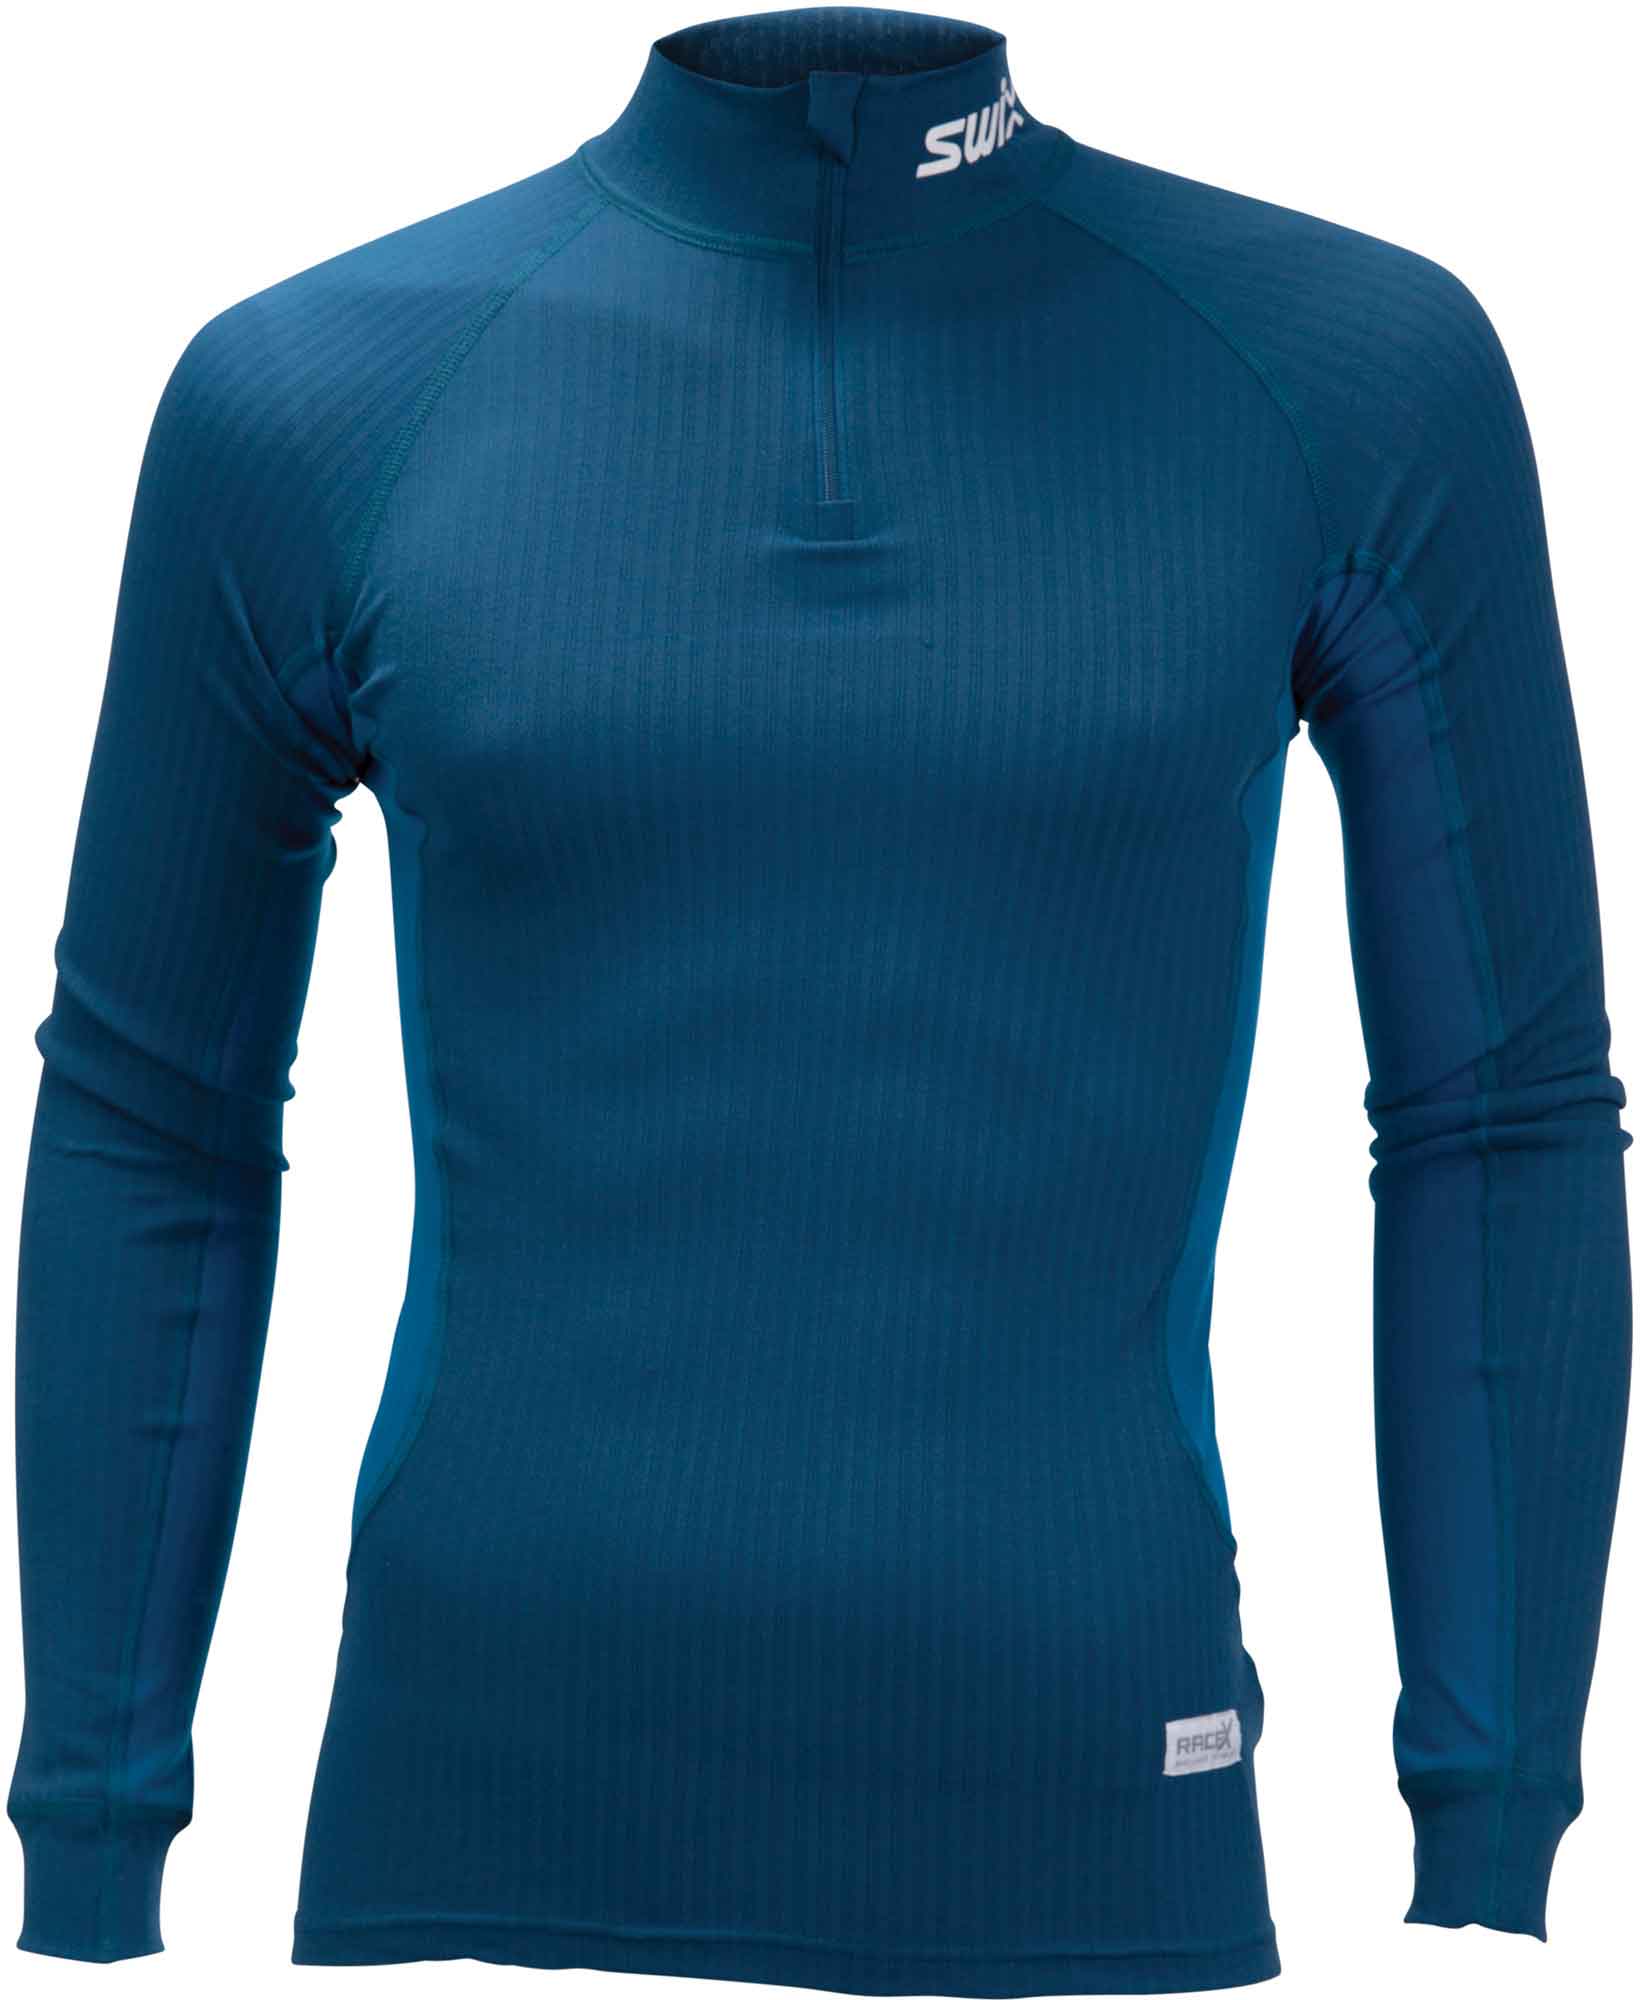 Functional long sleeve T-shirt and a collar